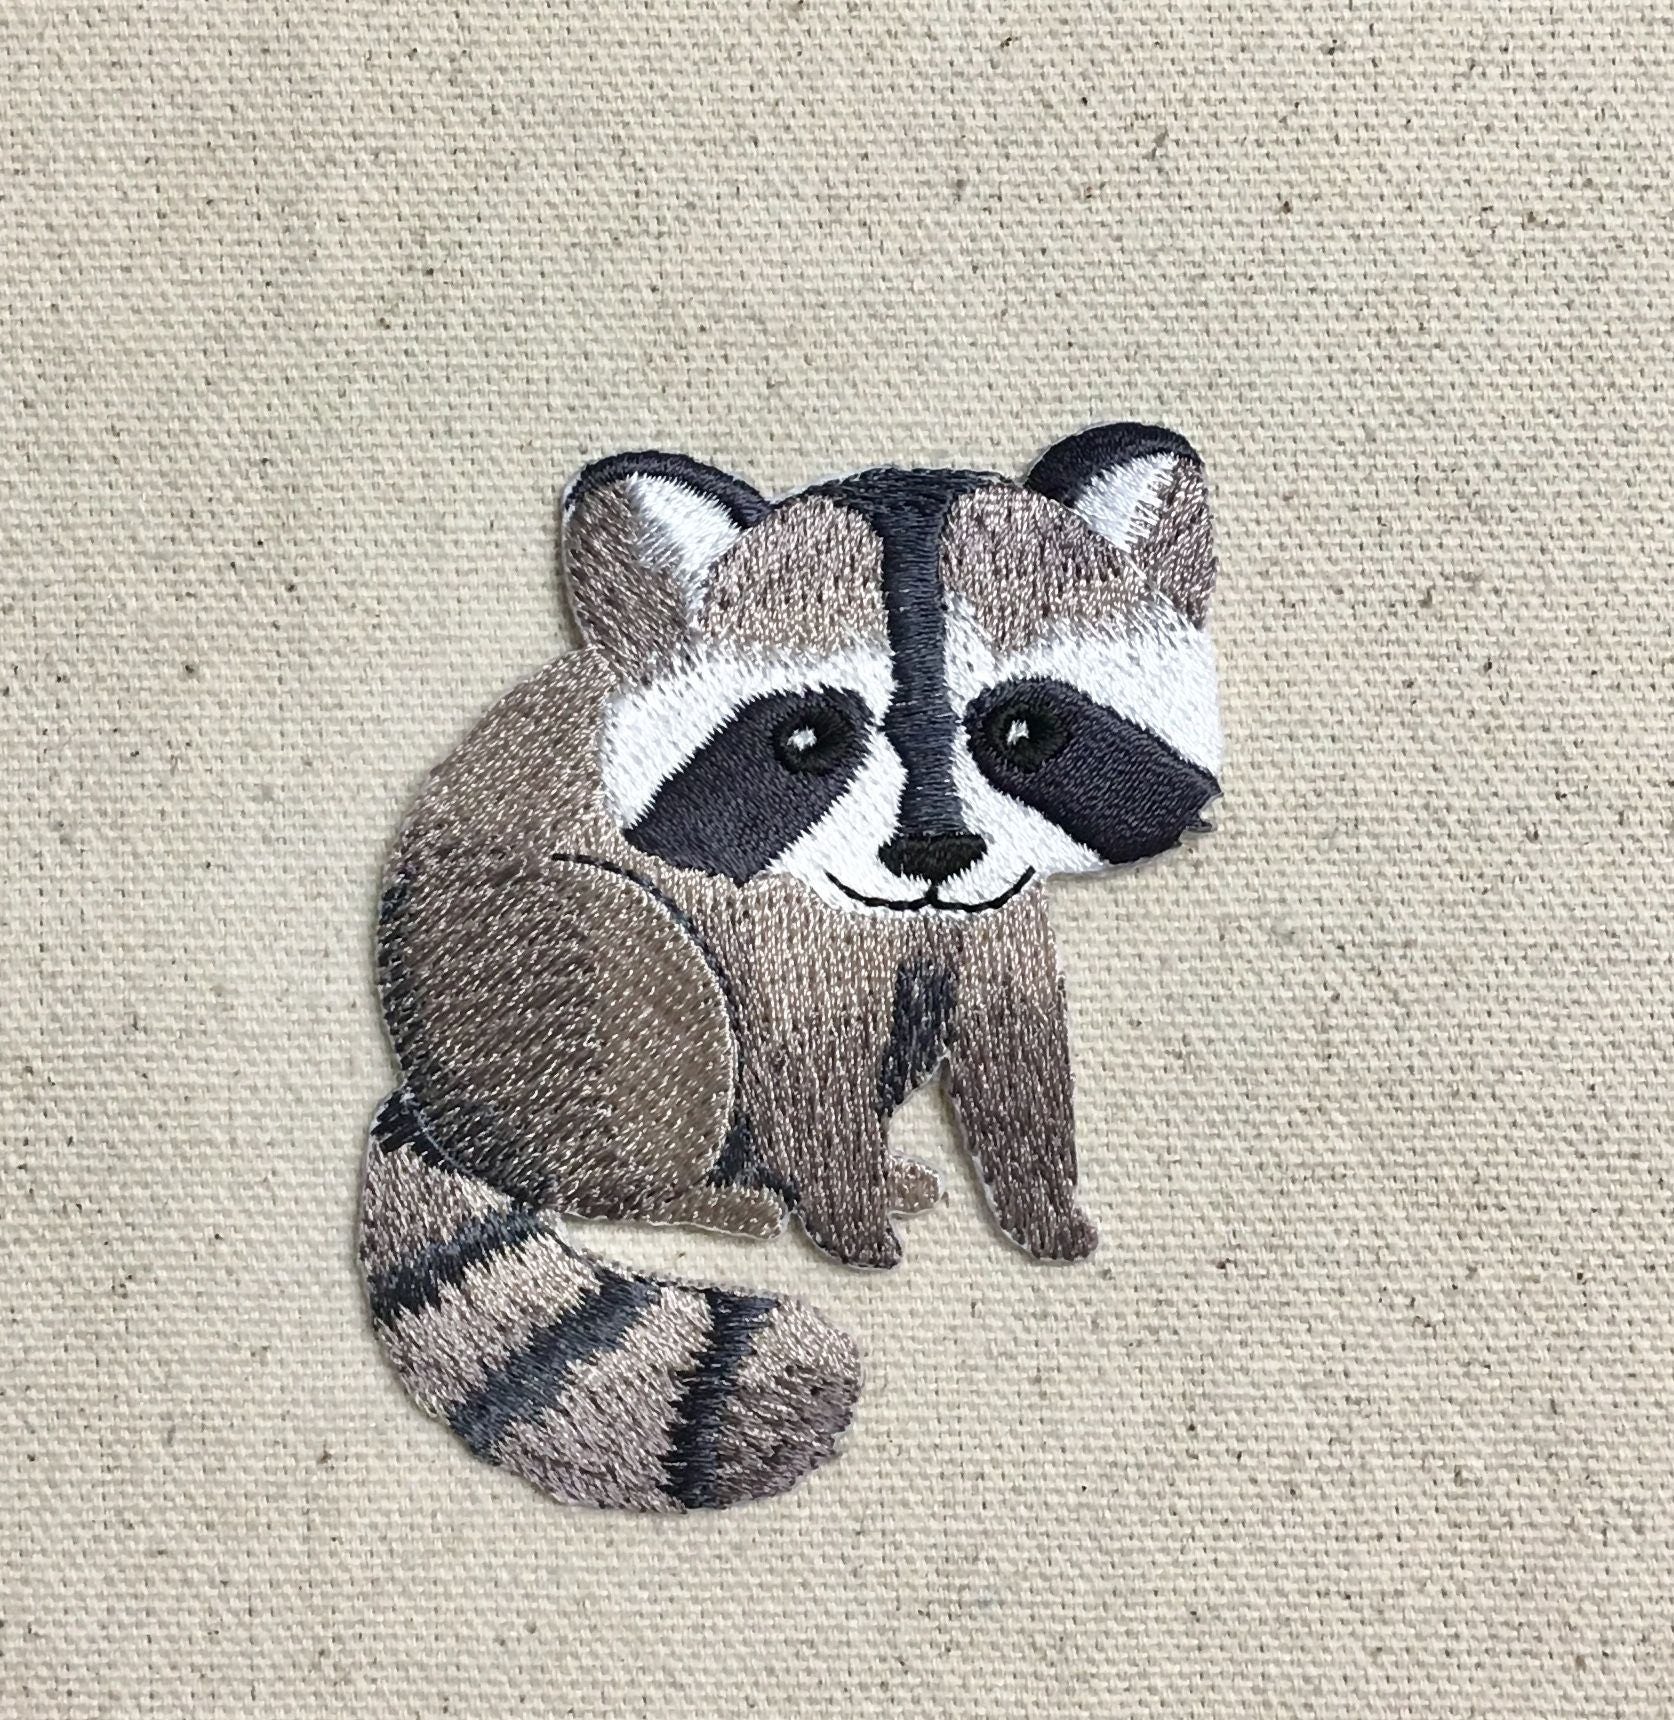 surfing hard working continue Baby Raccoon Full Body Facing Right Iron on Applique - Etsy